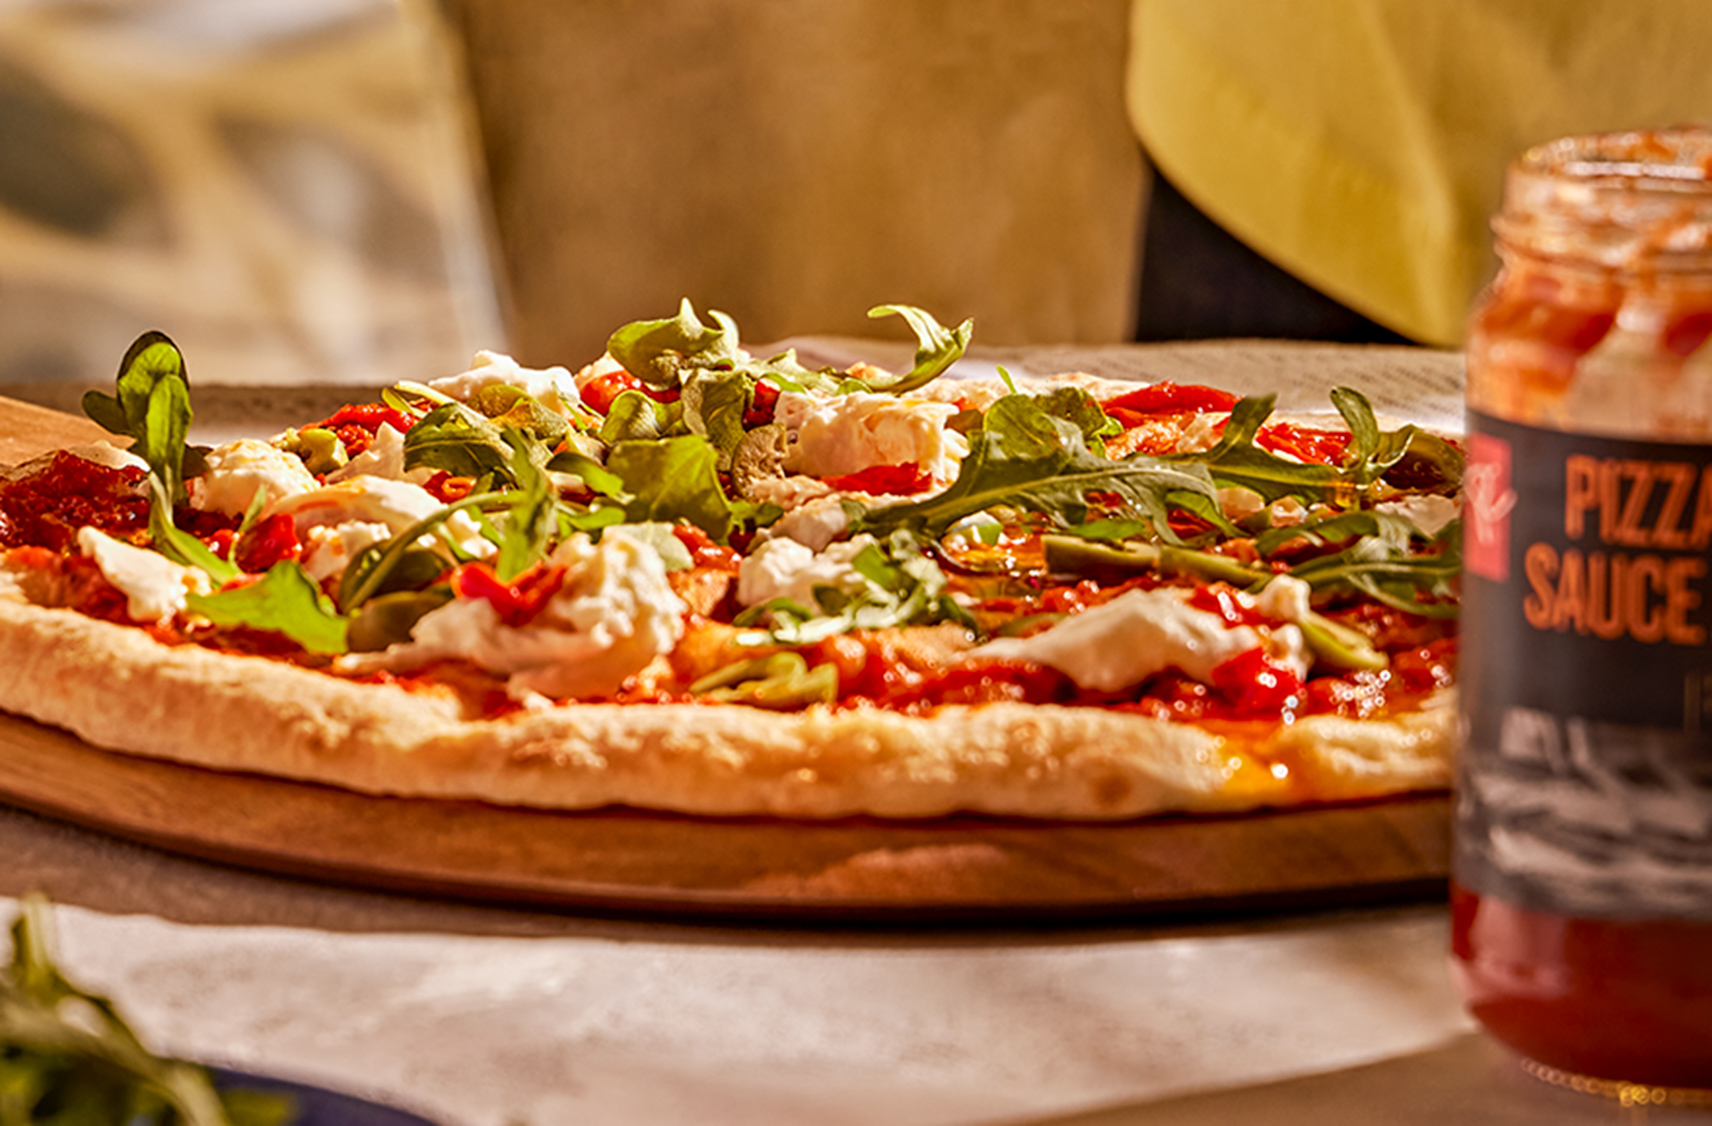 The PC Pizza oven sits in the distance as a hand drizzles some peperoncino chilli oil over a freshly baked pizza next to a jar of pizza sauce and salad and some beverages.